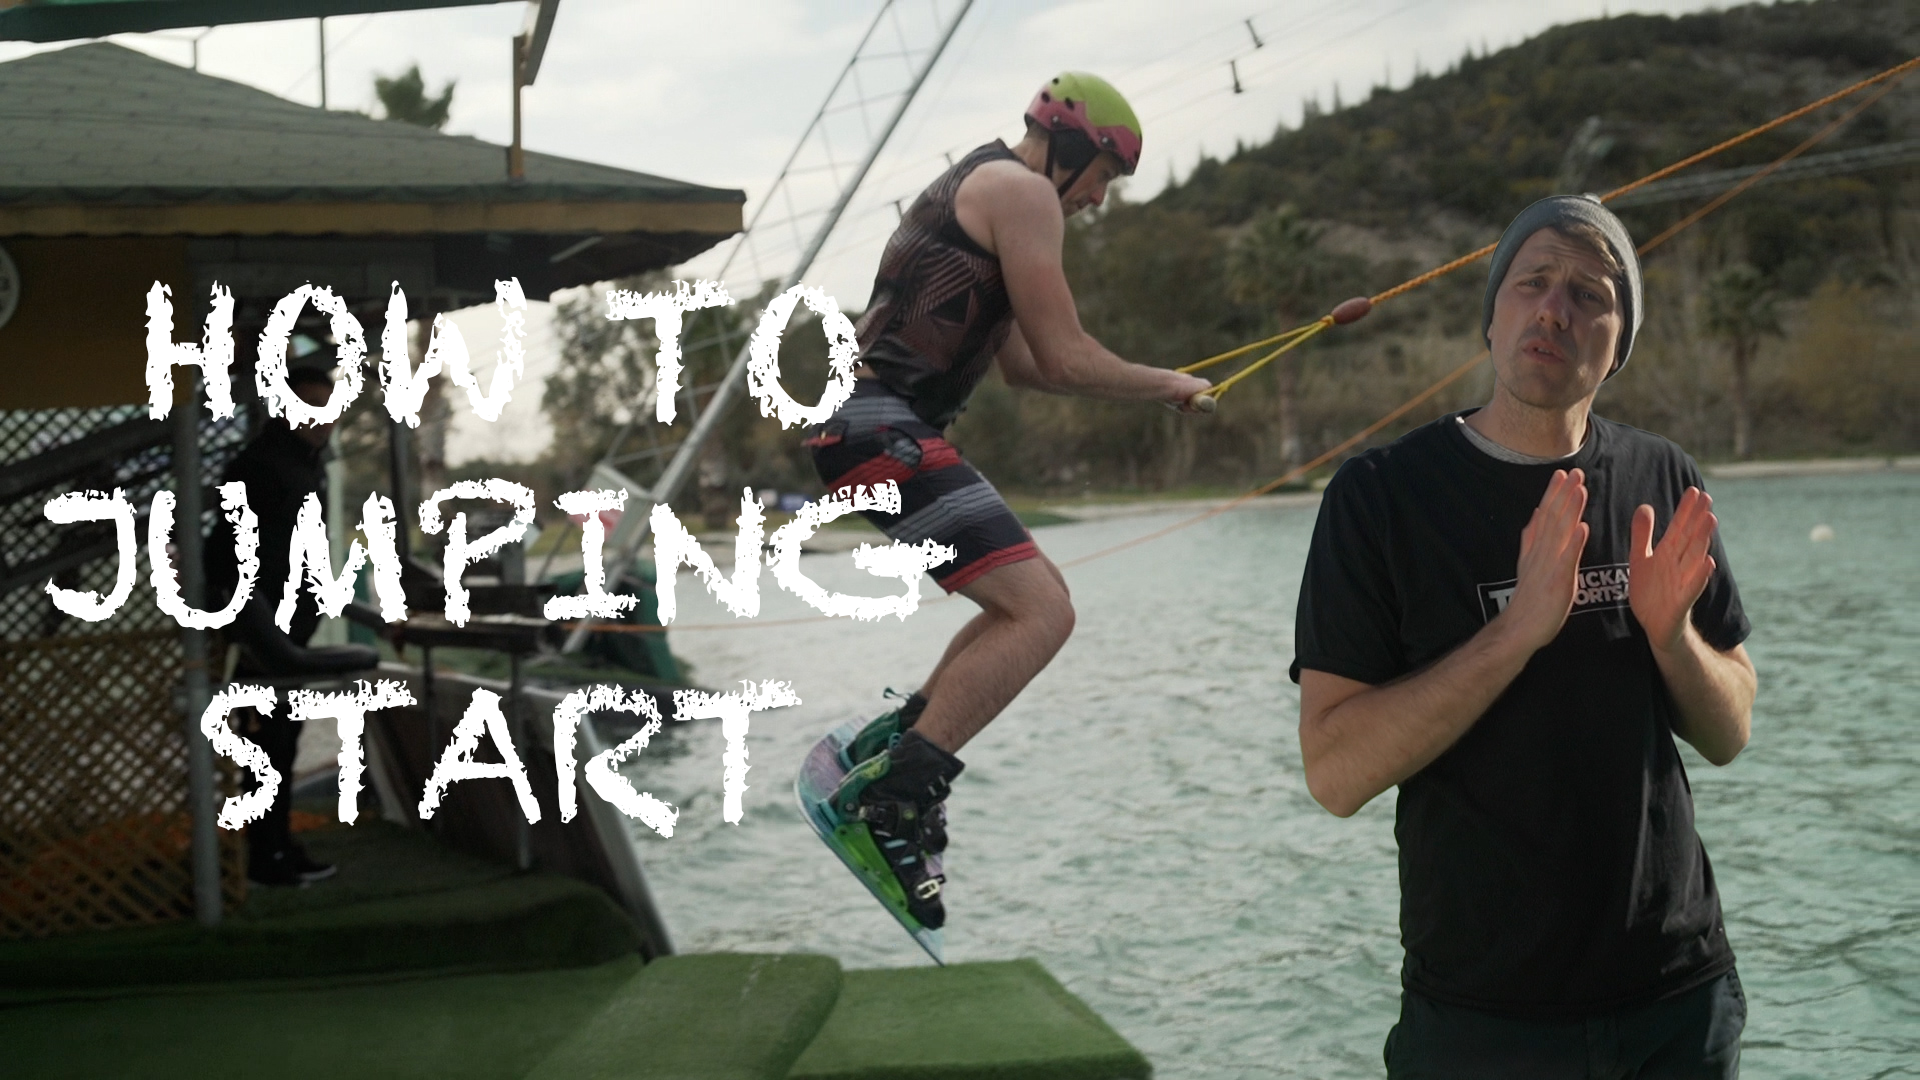 Read more about the article How to Jumping-Start (Wakeboarding)